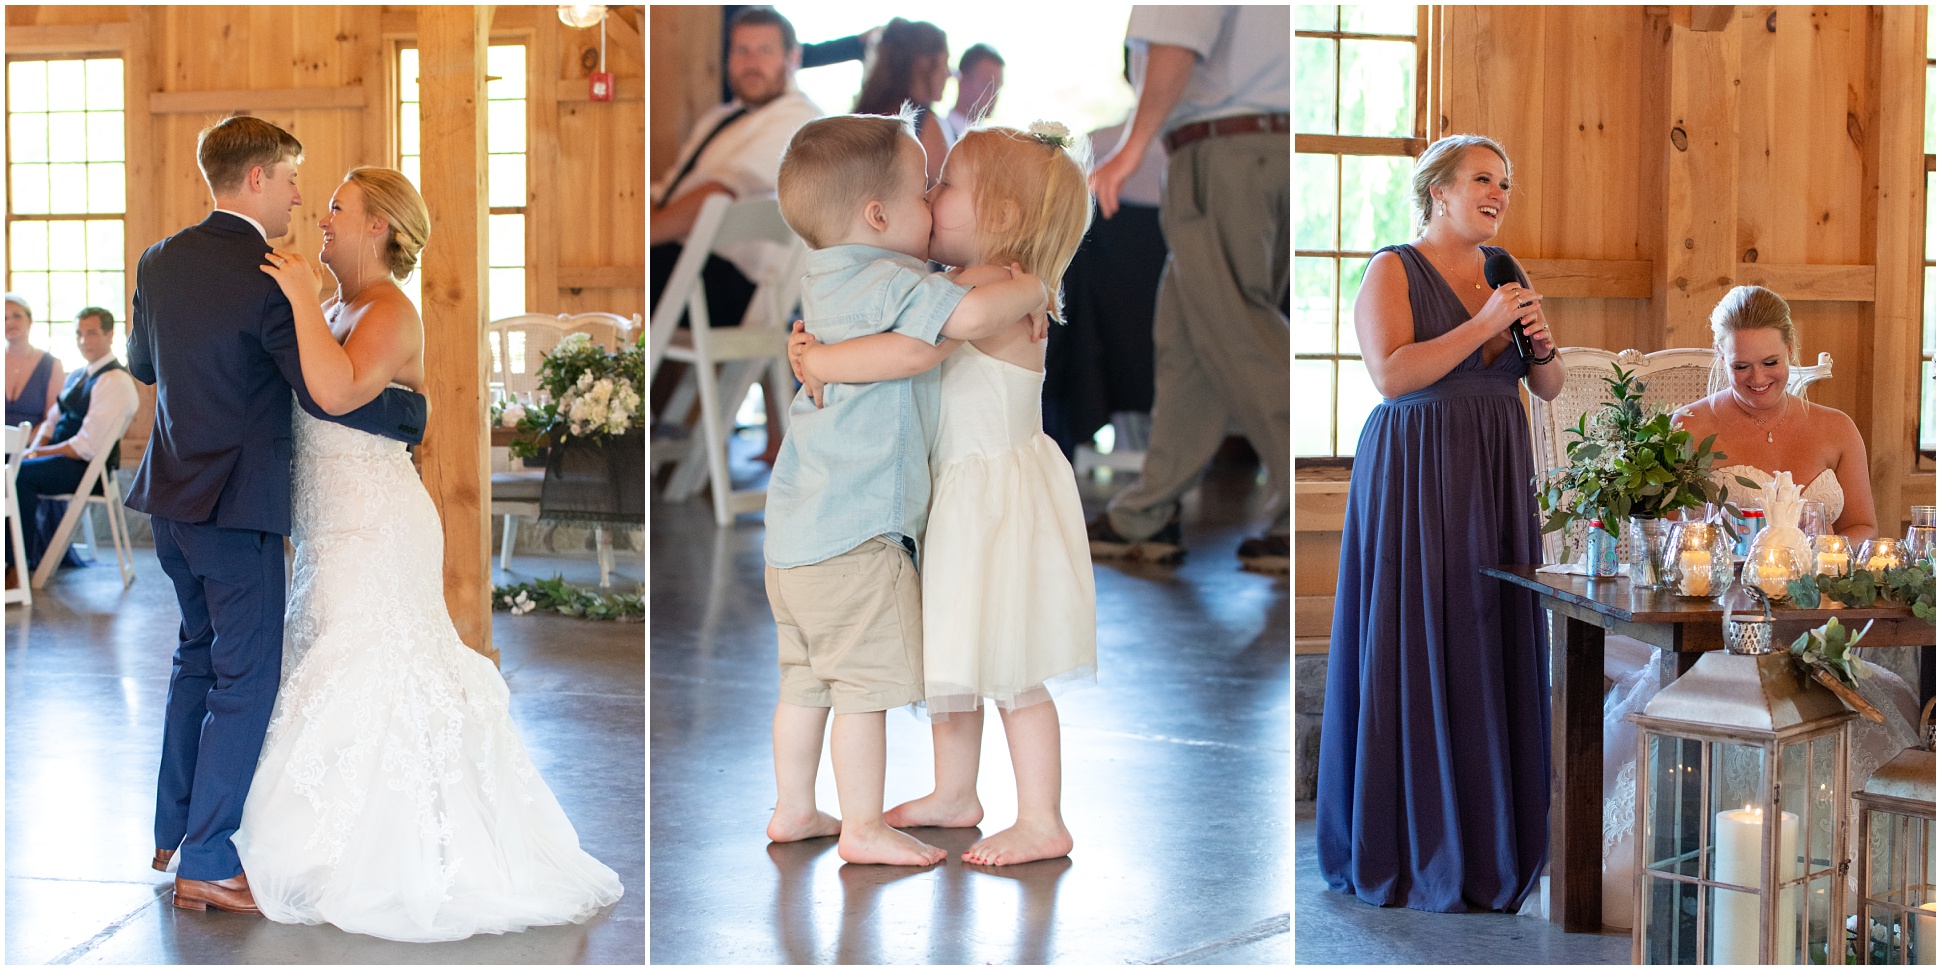 Dancing Photos and Speeches at Pond View Farm